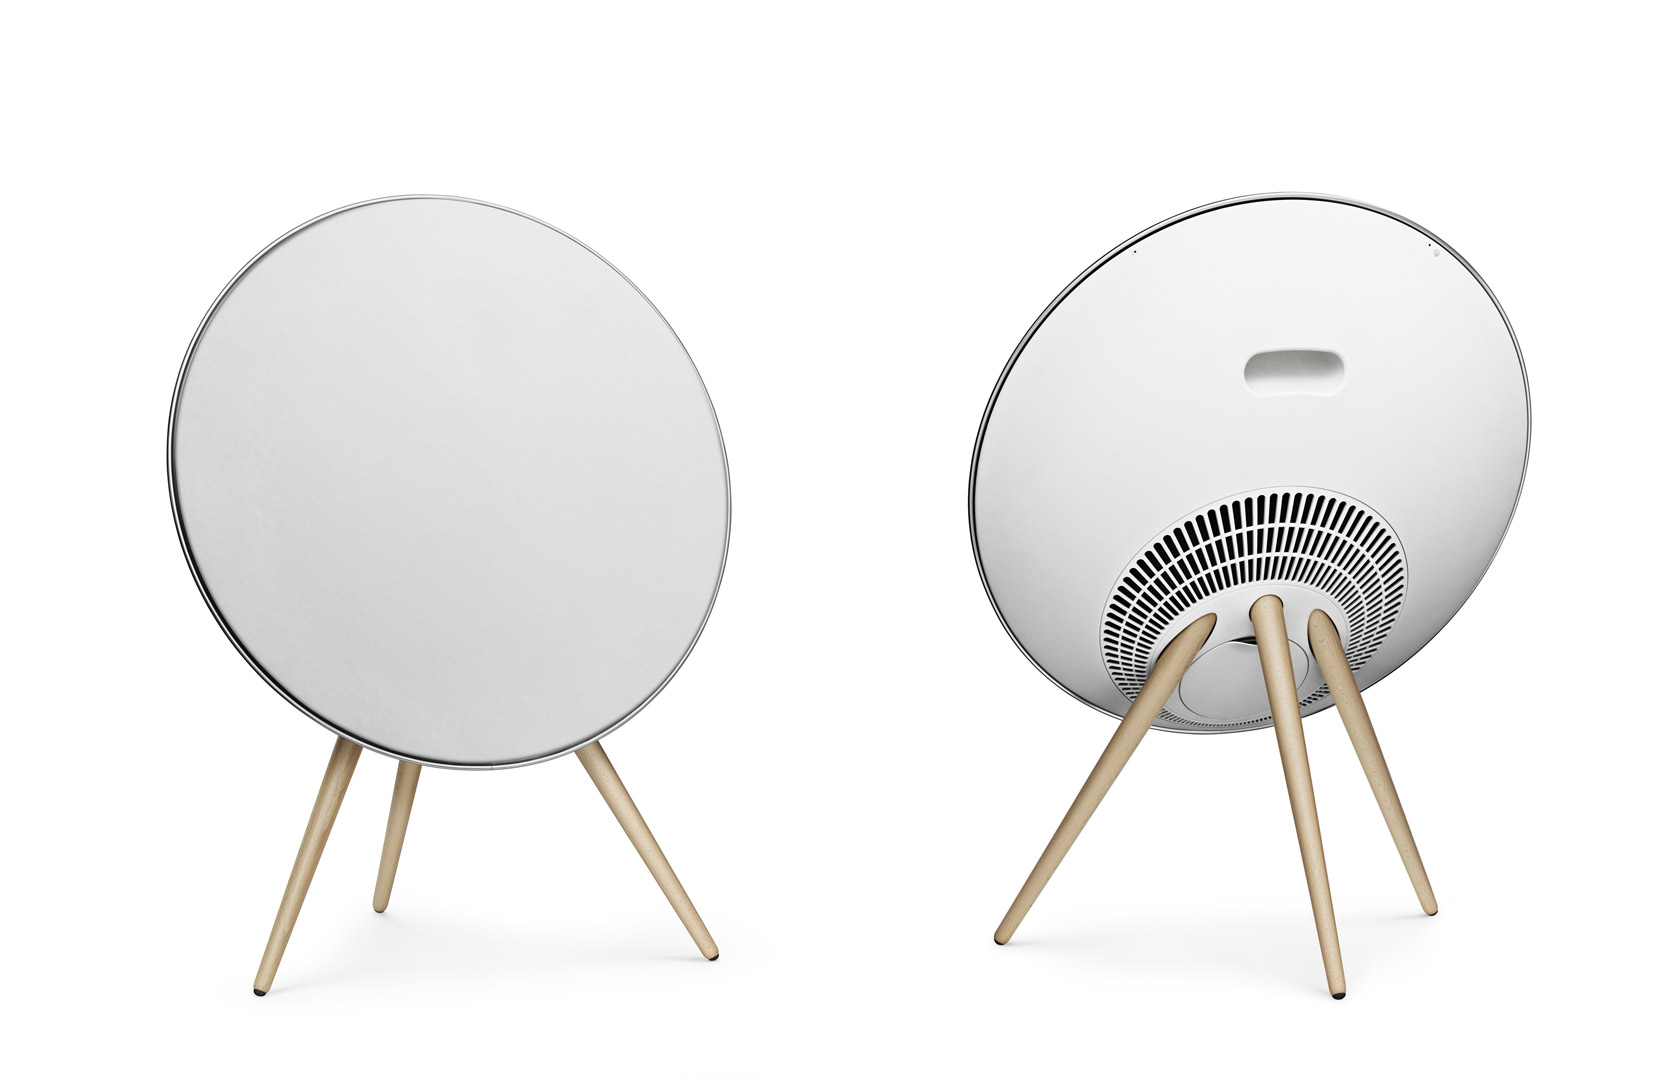 B&O_BeoPlay A9_White_Front_and_Back_on white